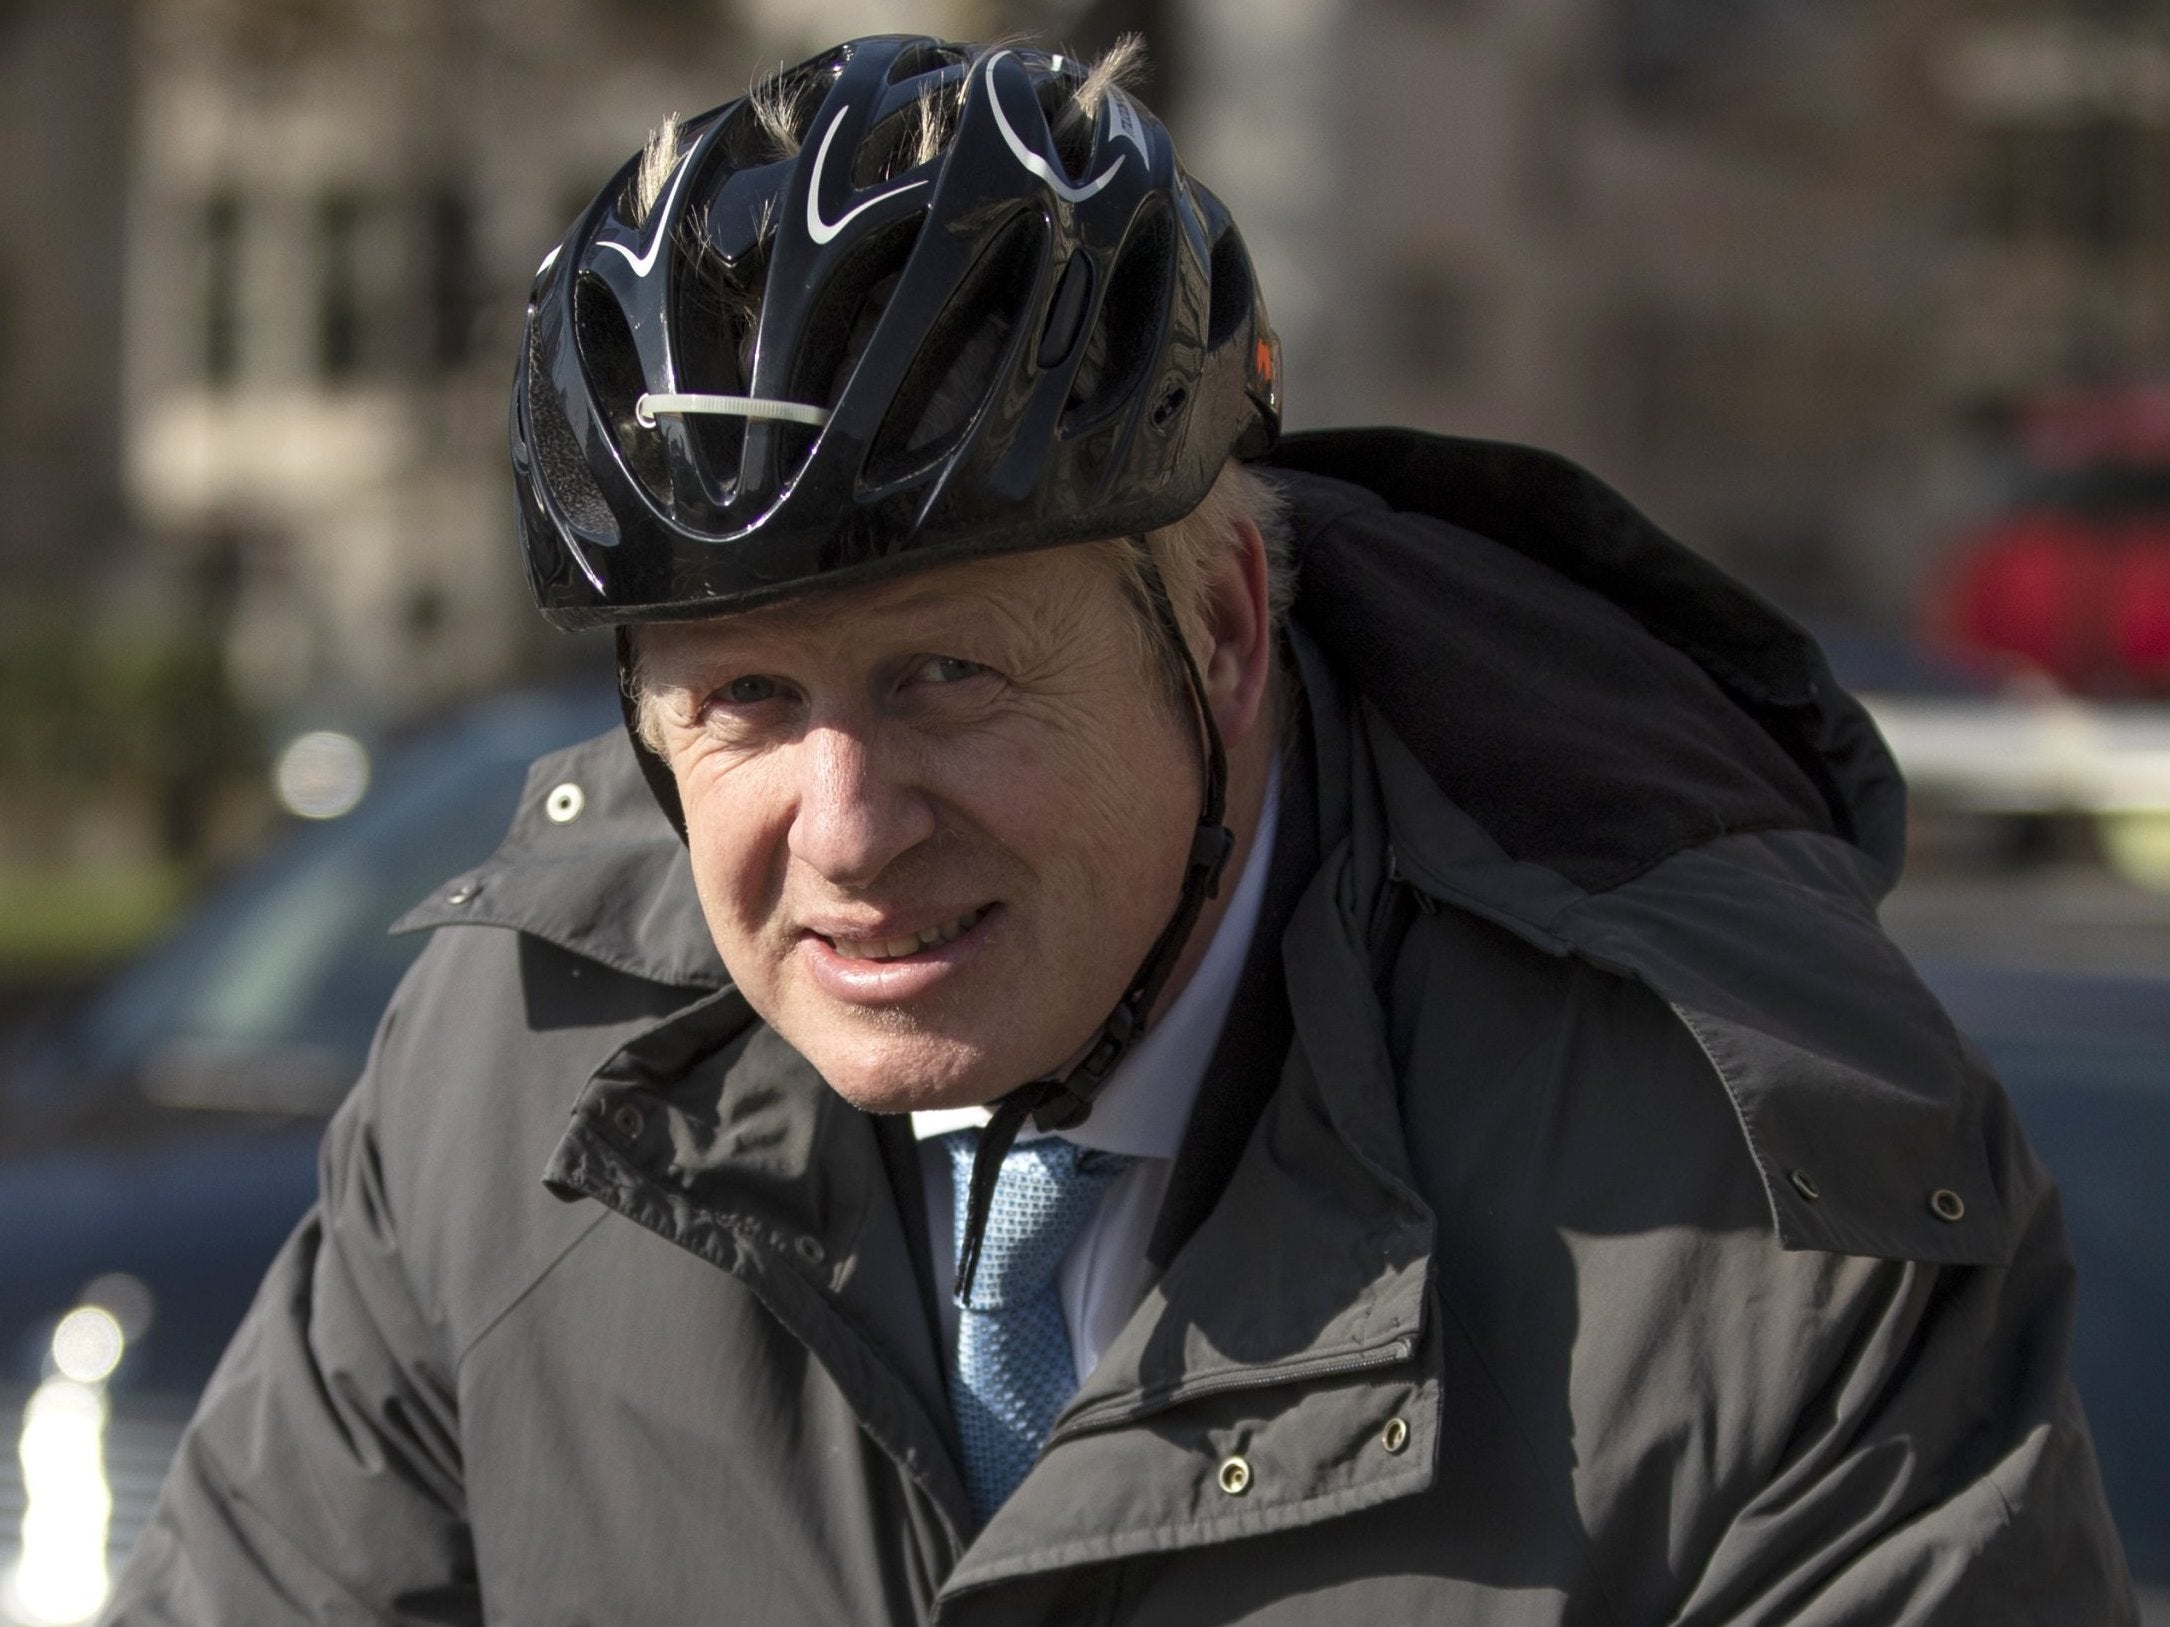 Boris Johnson cycles into Westminster on 1 April, 2019